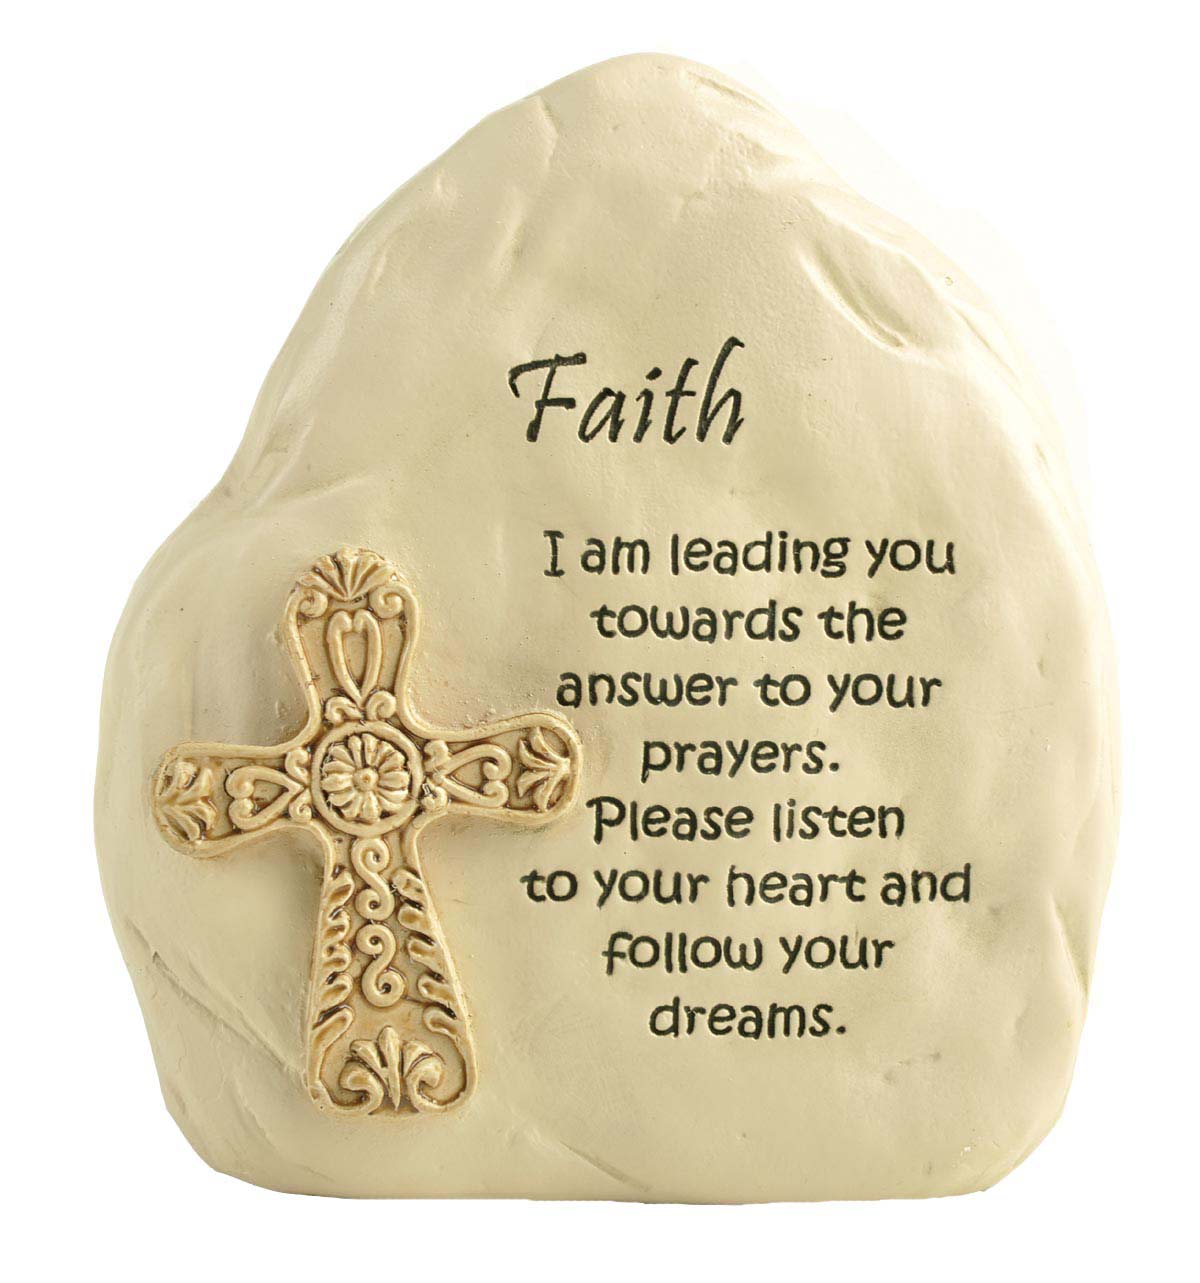 Ennas holding candle religious sculptures promotional holy gift-2